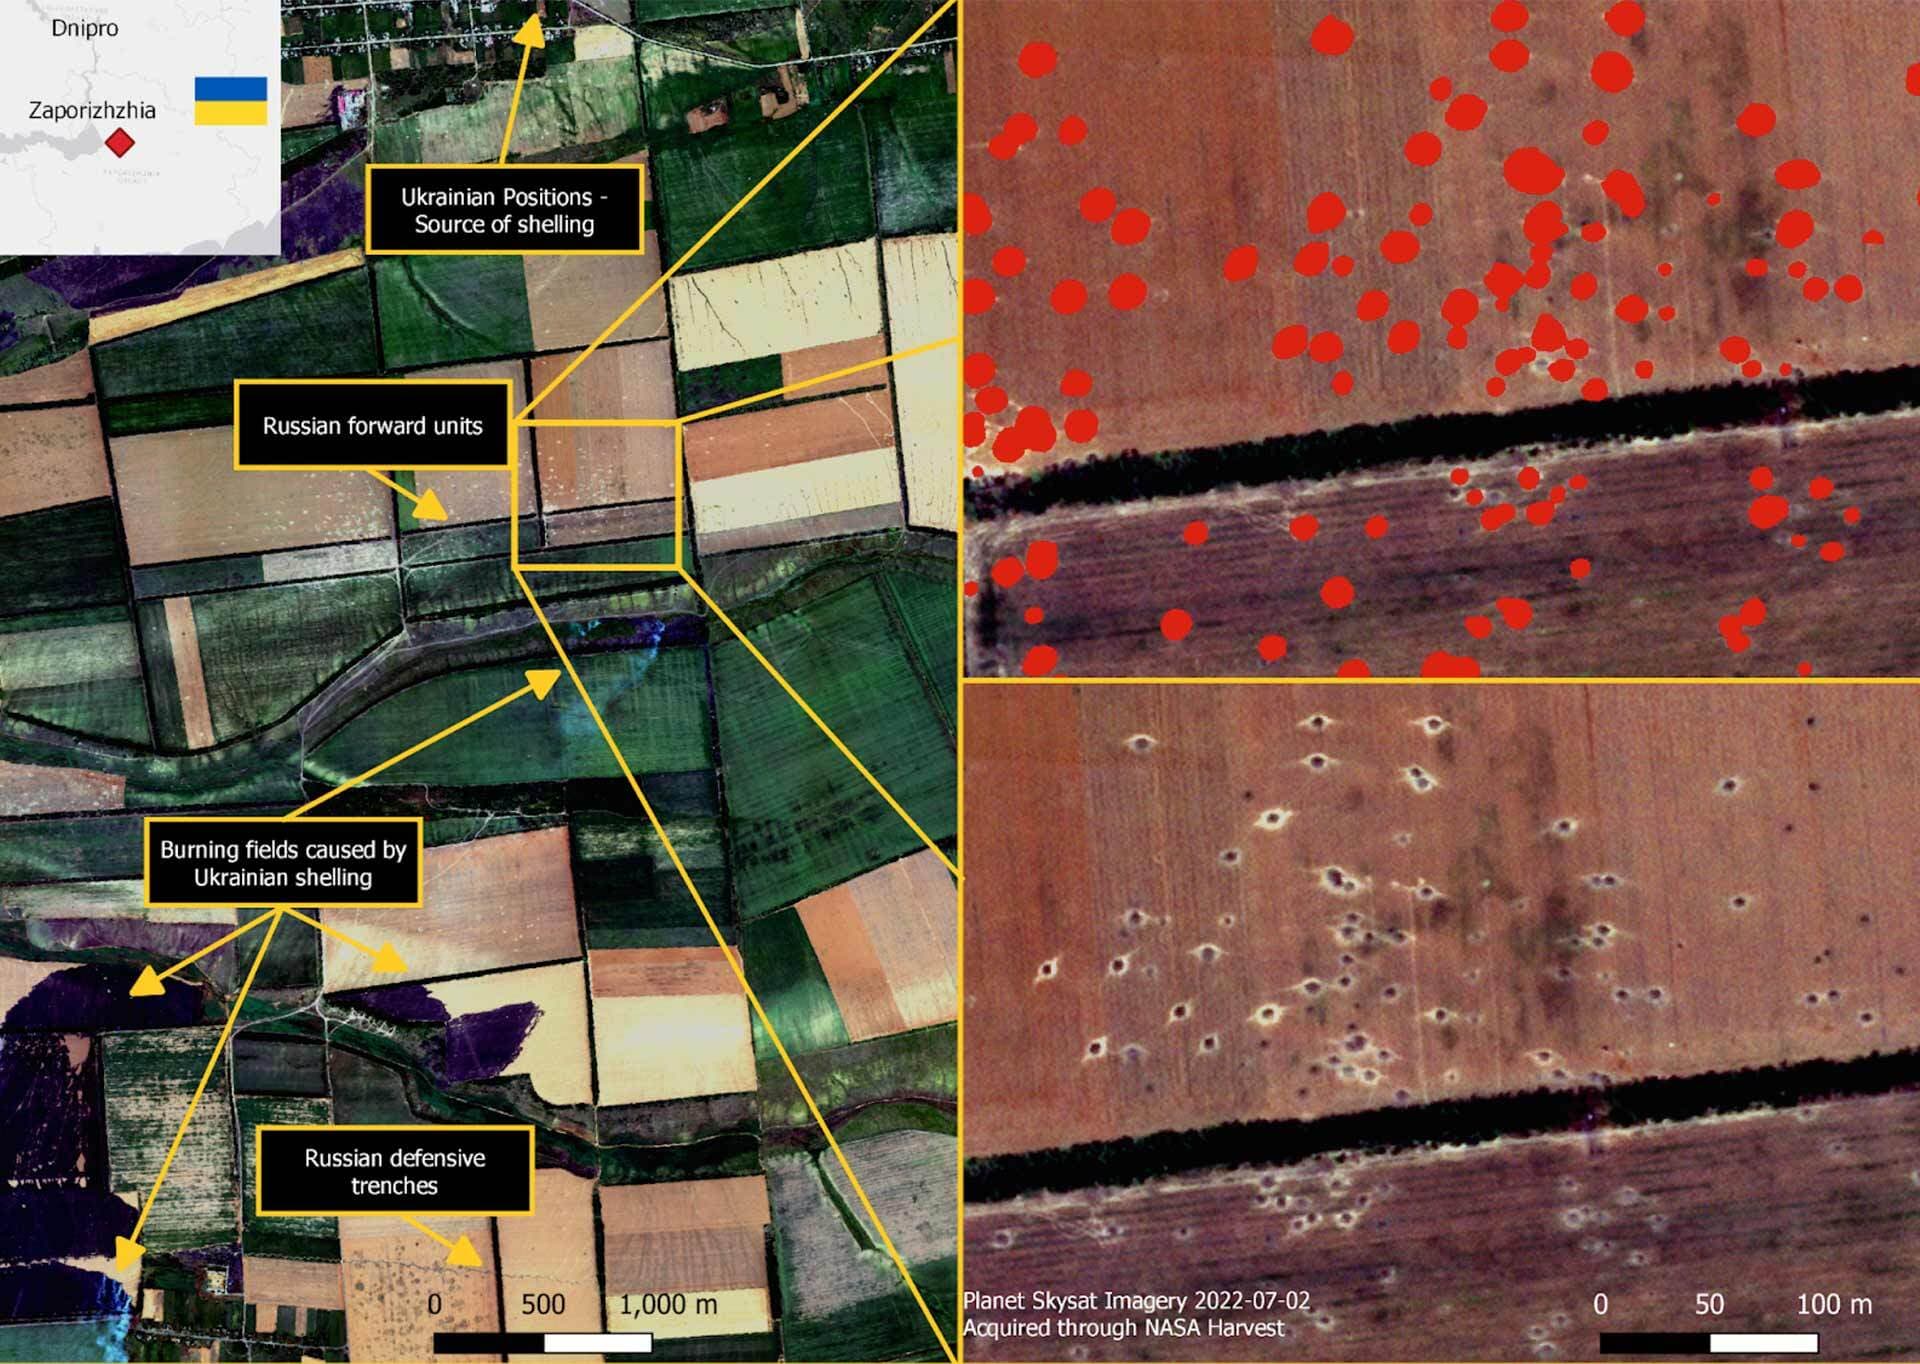 satellite imagery showing Ukrainian positions - source of shelling, Russian forward units, burning fields caused by Ukrainian shelling, and Russian defensive trenches